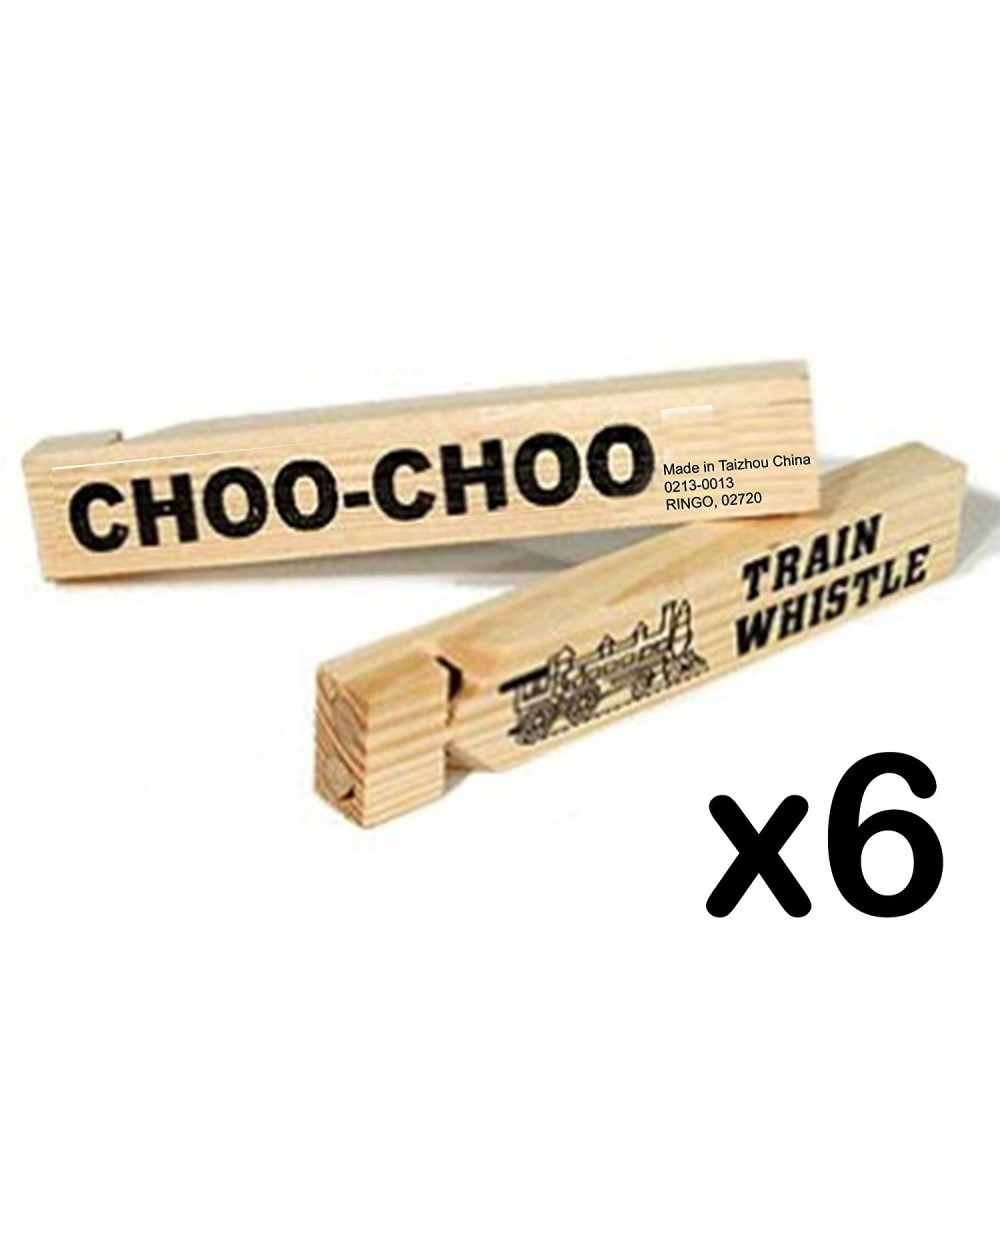 Noisemakers (LOT OF 6) Wooden 7" CHOO-CHOO Train Whistles. Party Favors- Prizes. - C711QW2JV75 $18.79